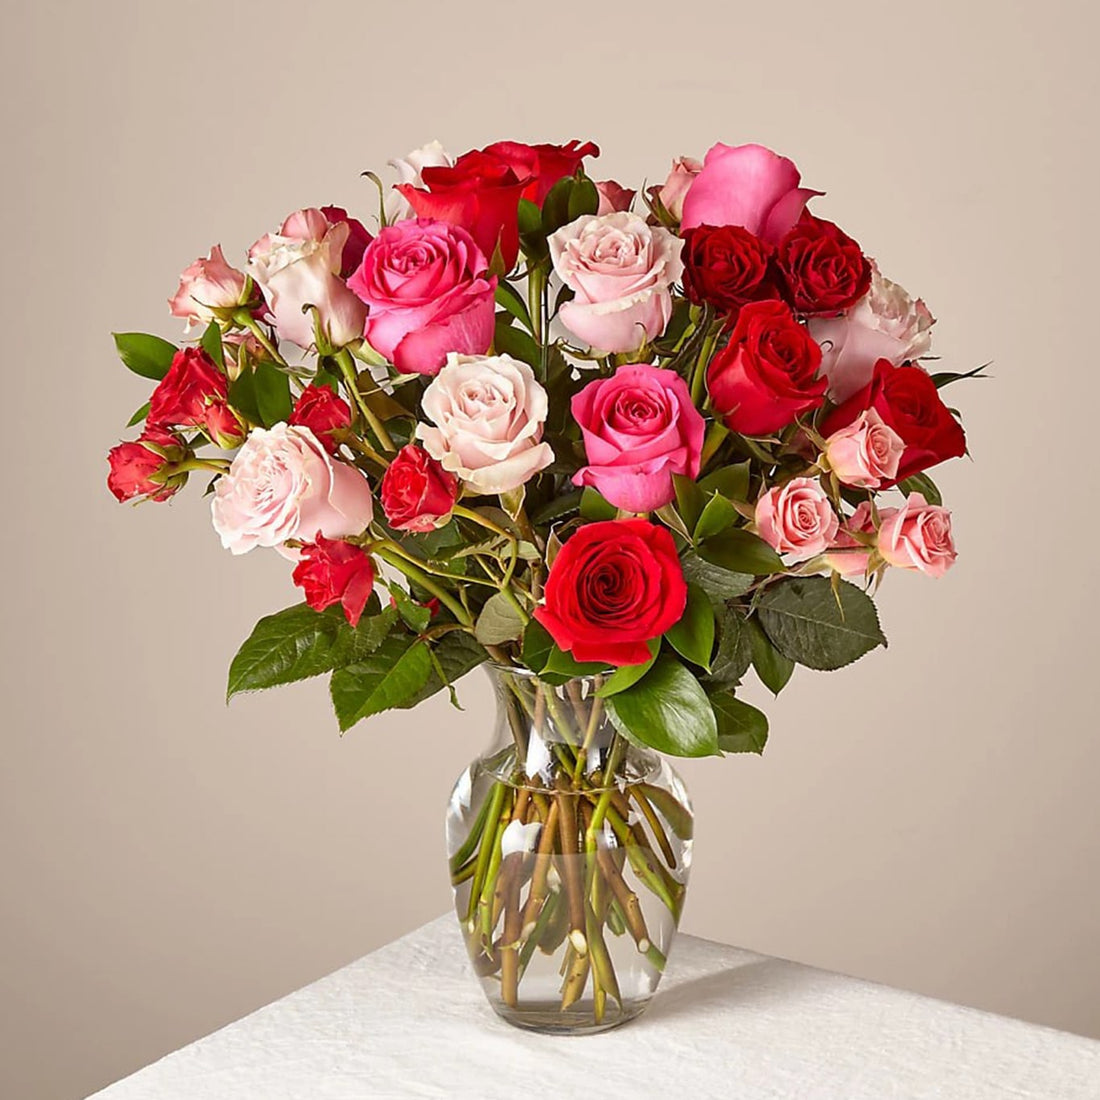 Original Bouquet with Vase, Assorted colors of roses, tell your special someone that your love is meant to be special, it is a beautiful anniversary gift, birthday flower gift, flowers for all occasions and decoration, Fresh Flowers Orlando.